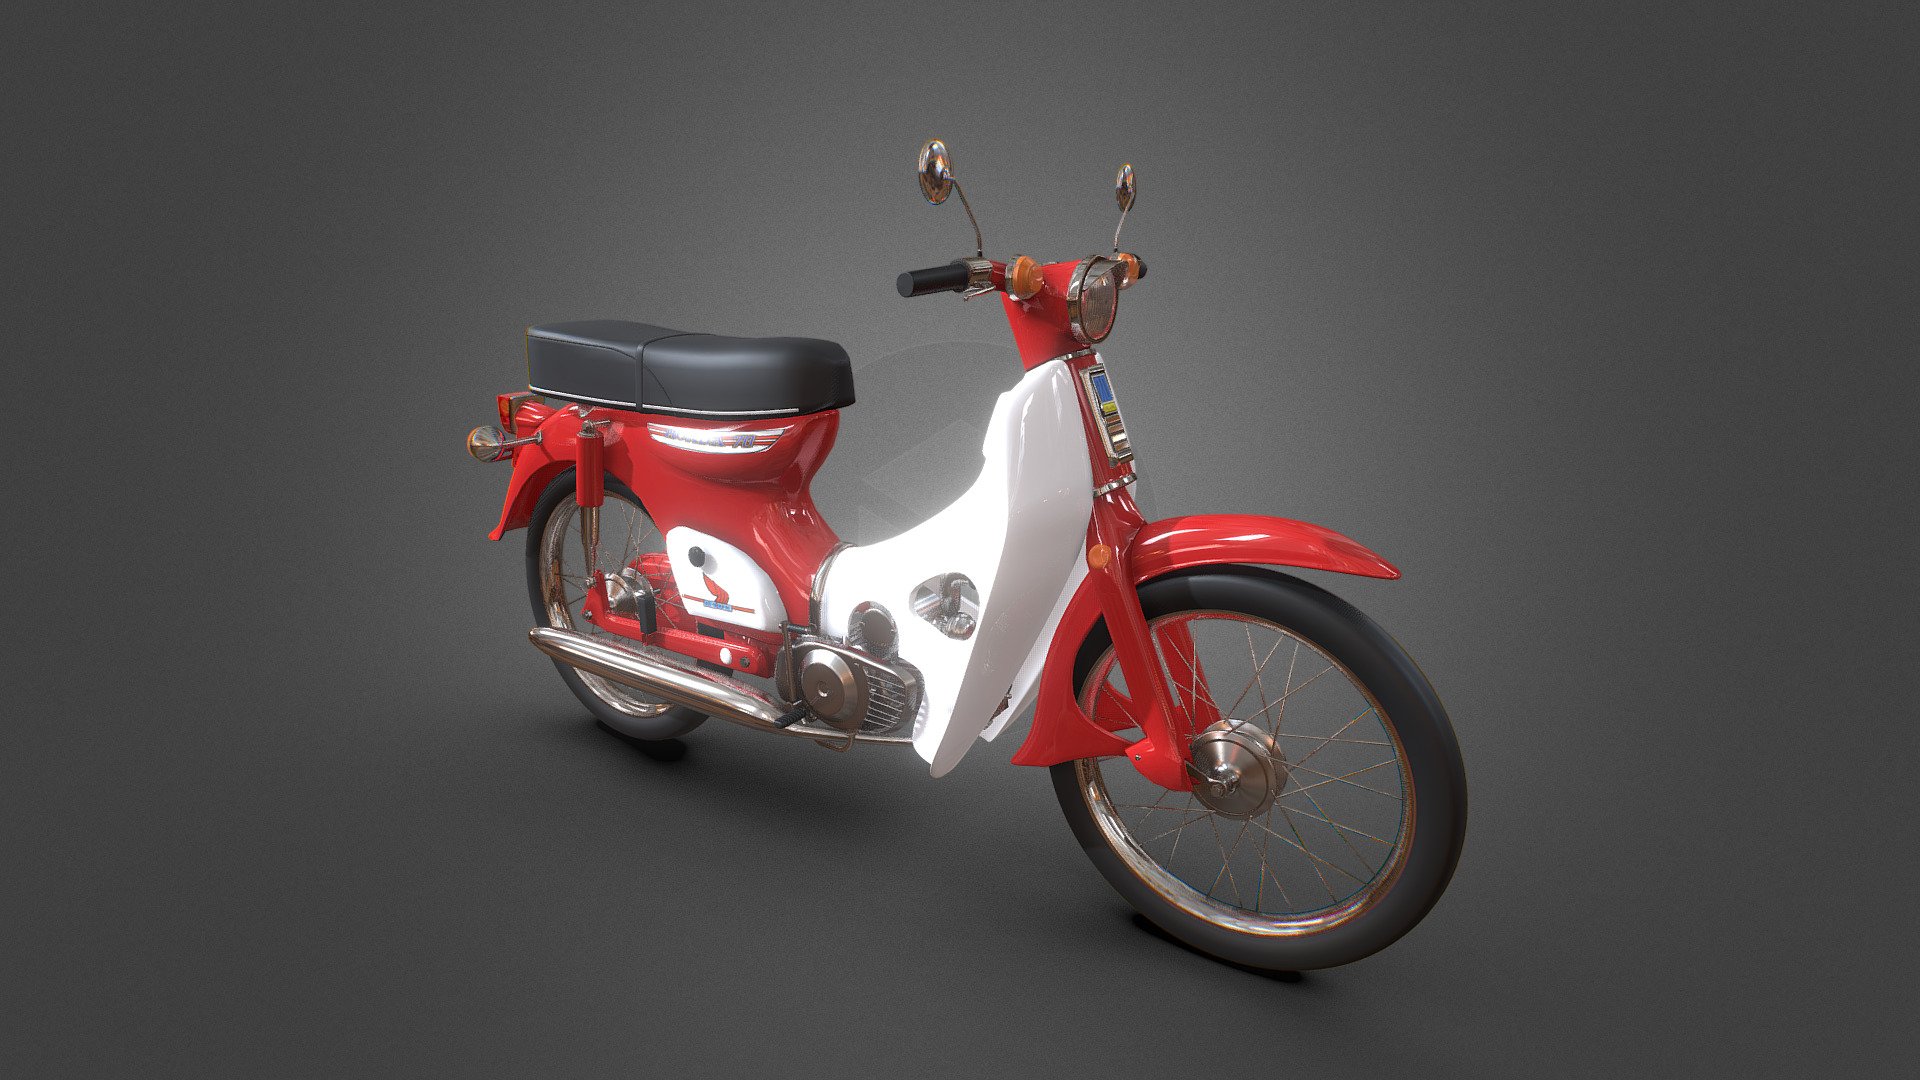 My first 3D modelling of motorcycle, 3D modeled in 2018 using my old celeron laptop(haha). Honda SuperCub 1971 based on Indonesian model, i made this due to my friend requested this when i was in highschool. Not the best 3D model i made, but for sure it's memorable just like the motorcycle itself 3d model